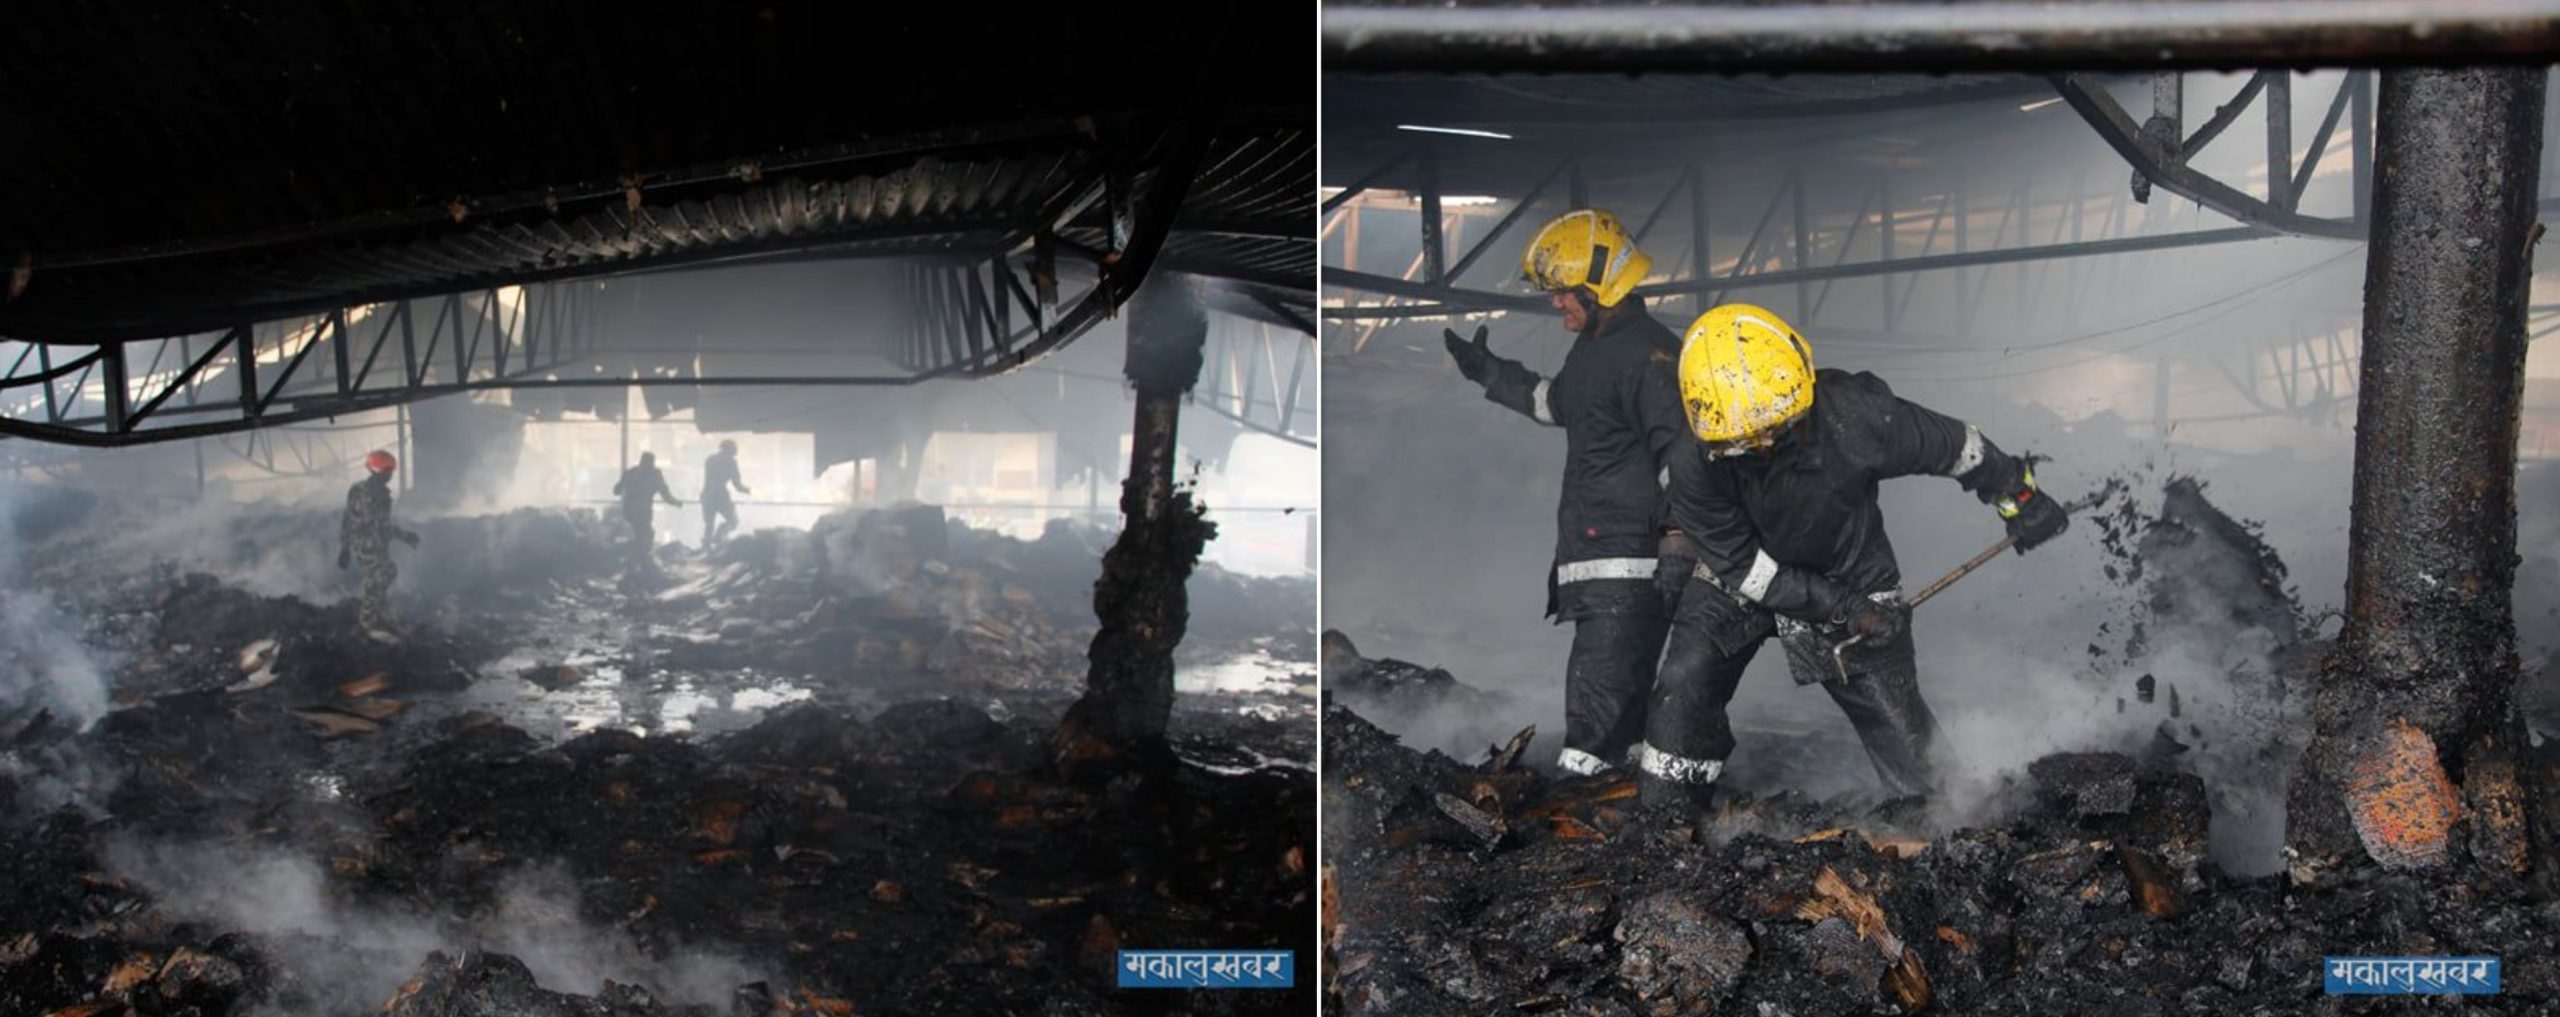 A fire broke out at Nebico’s Biscuit Industry in Balaju Industrial Area